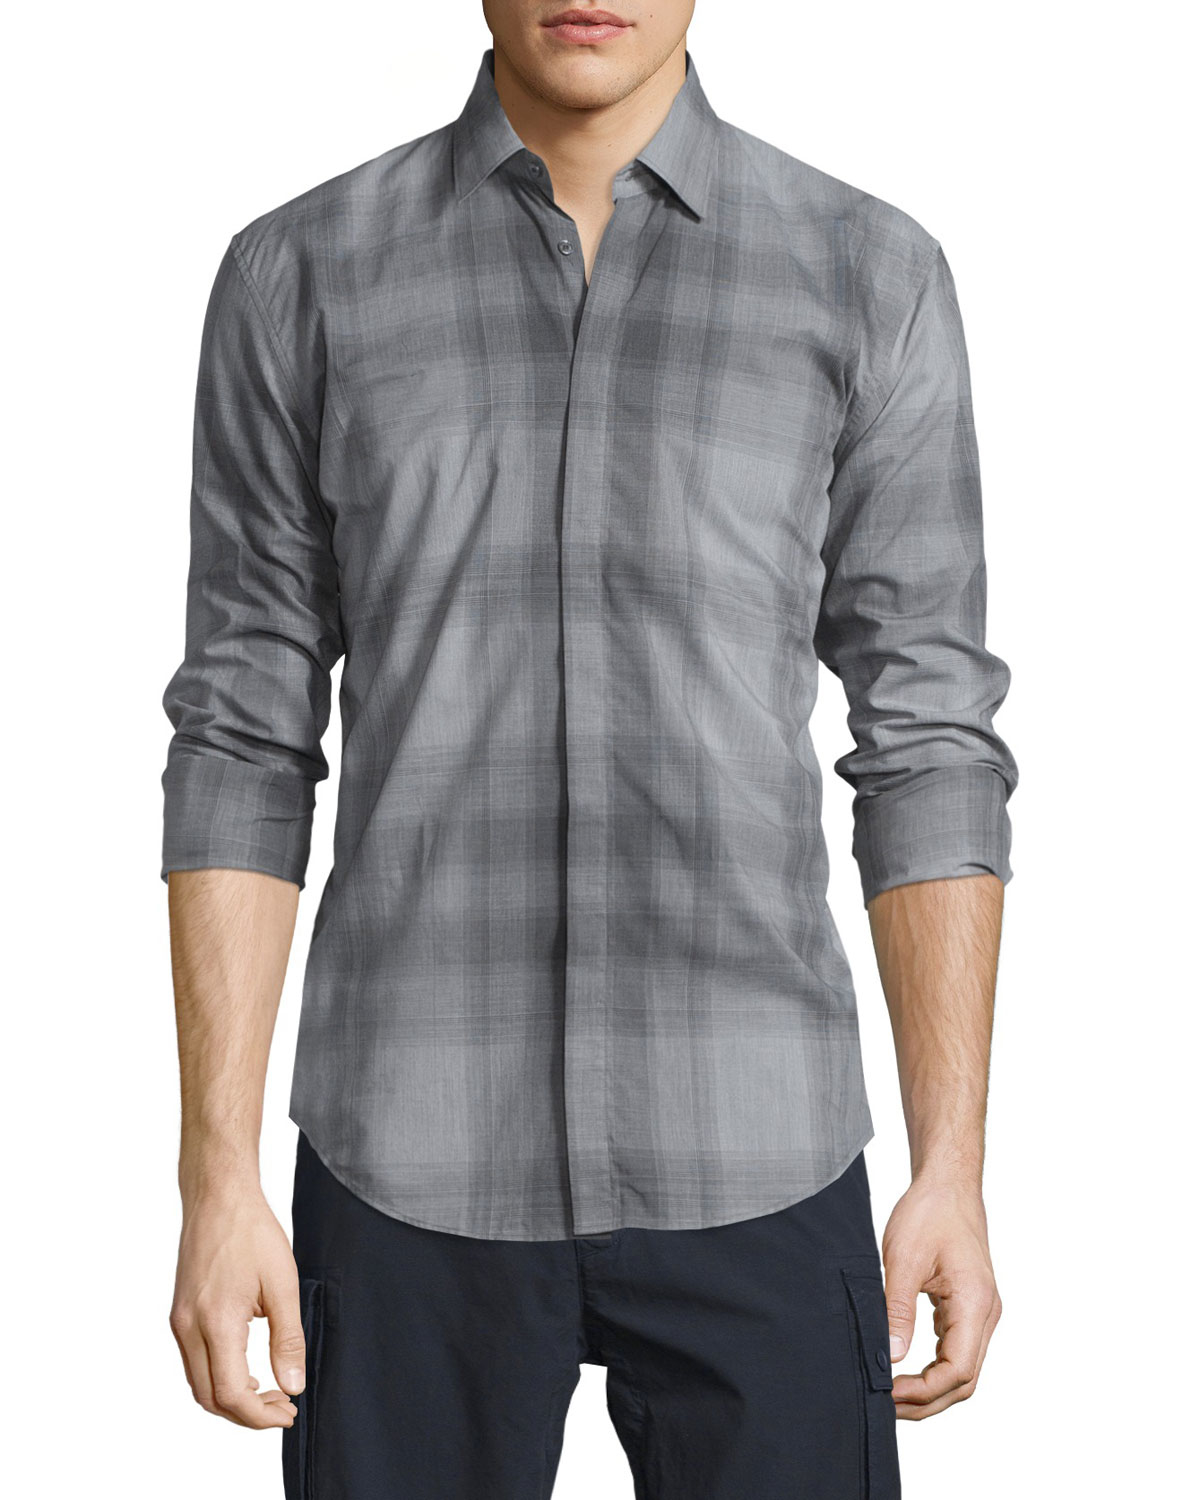 Burberry Faded Check Long-sleeve Sport Shirt in Gray for Men - Lyst